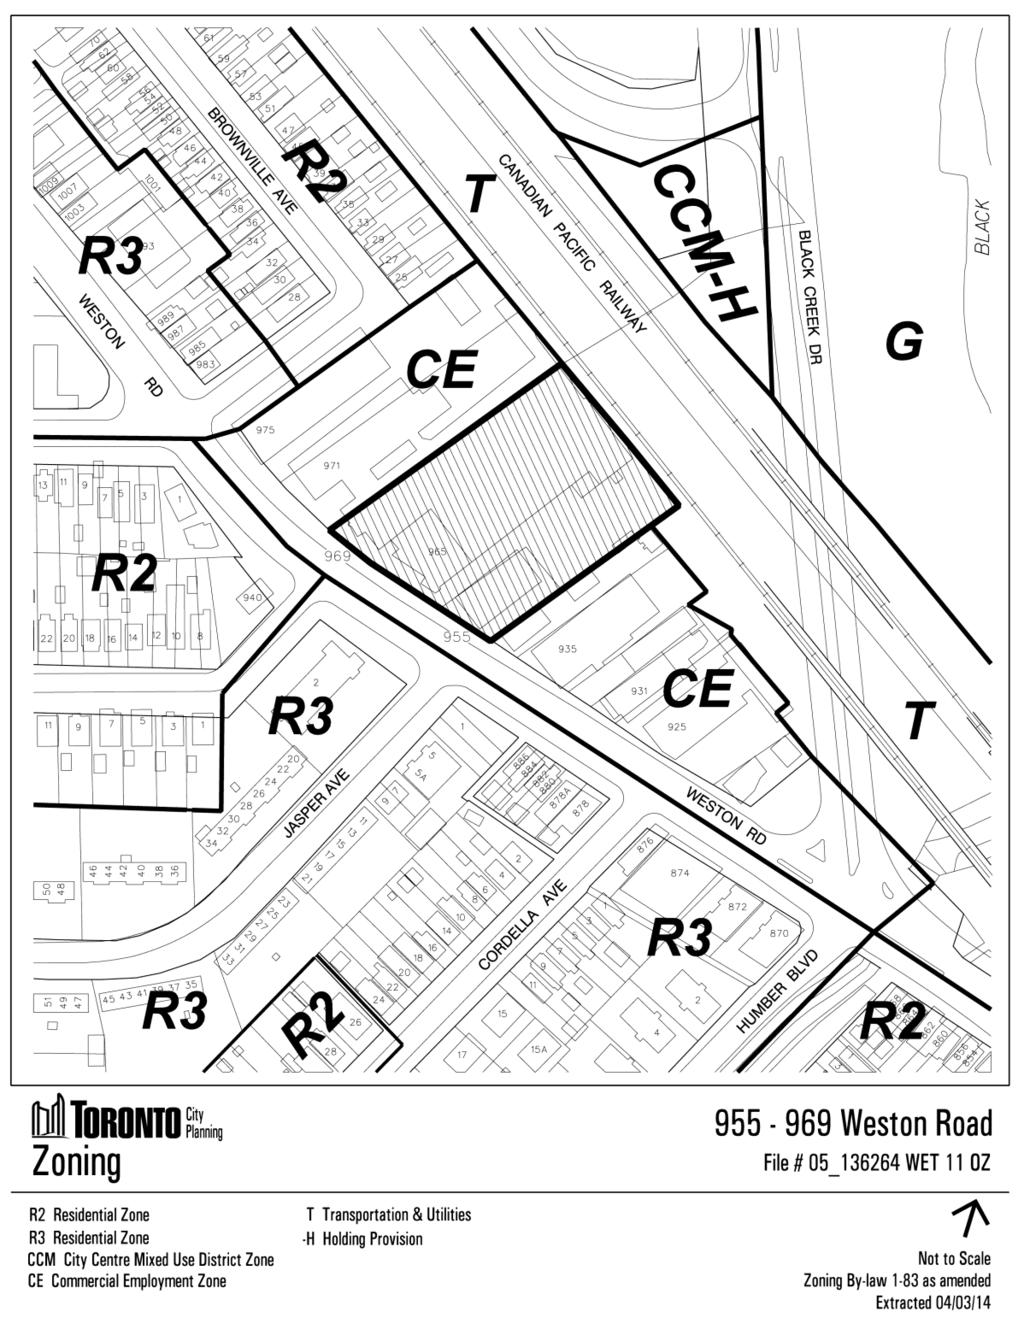 Attachment 3: Zoning Drive Area